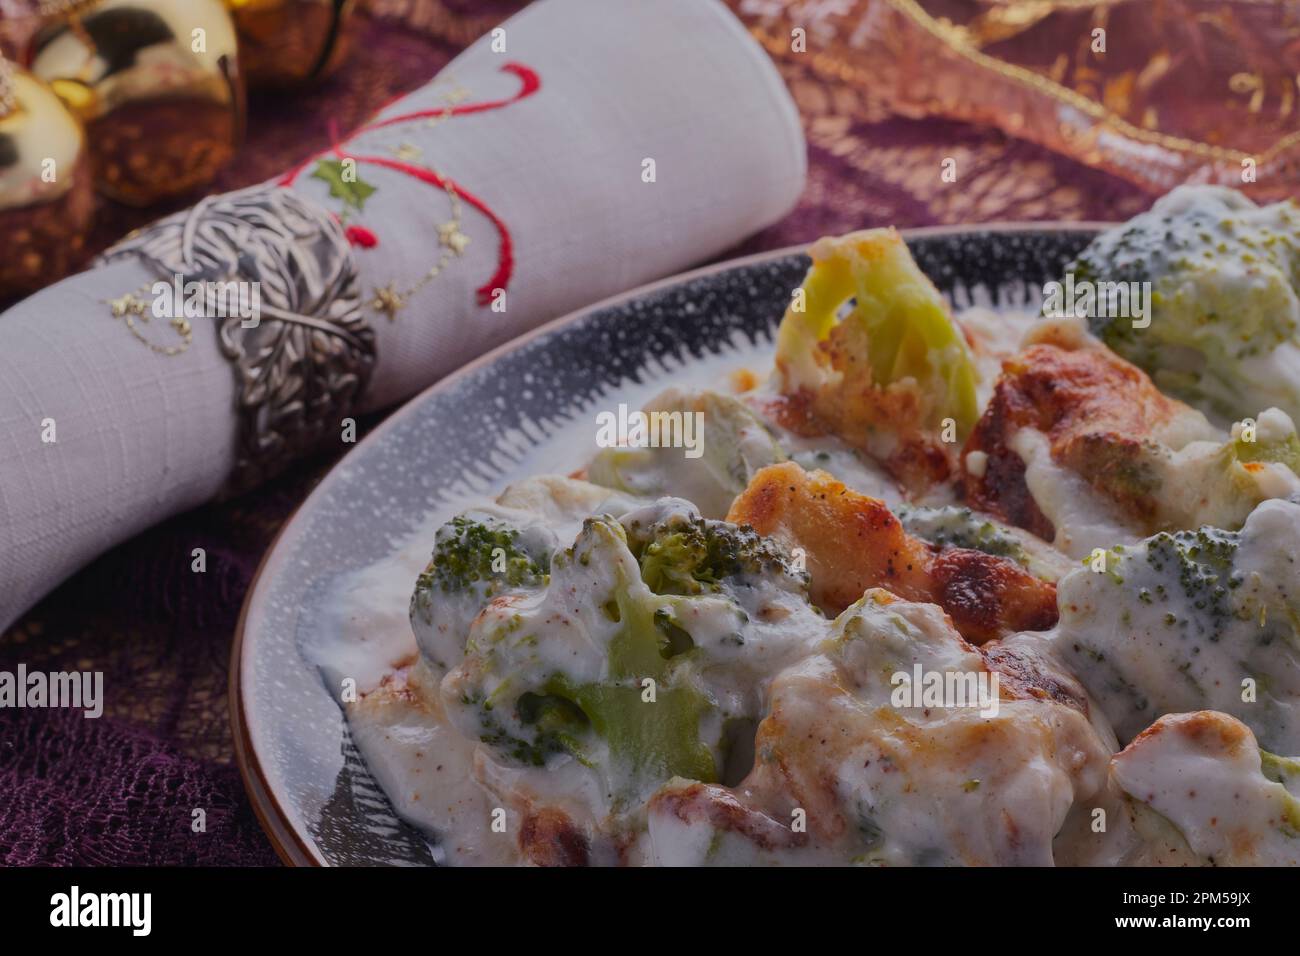 Christmas vegetarian broccoli bake with decorations at the side. Stock Photo